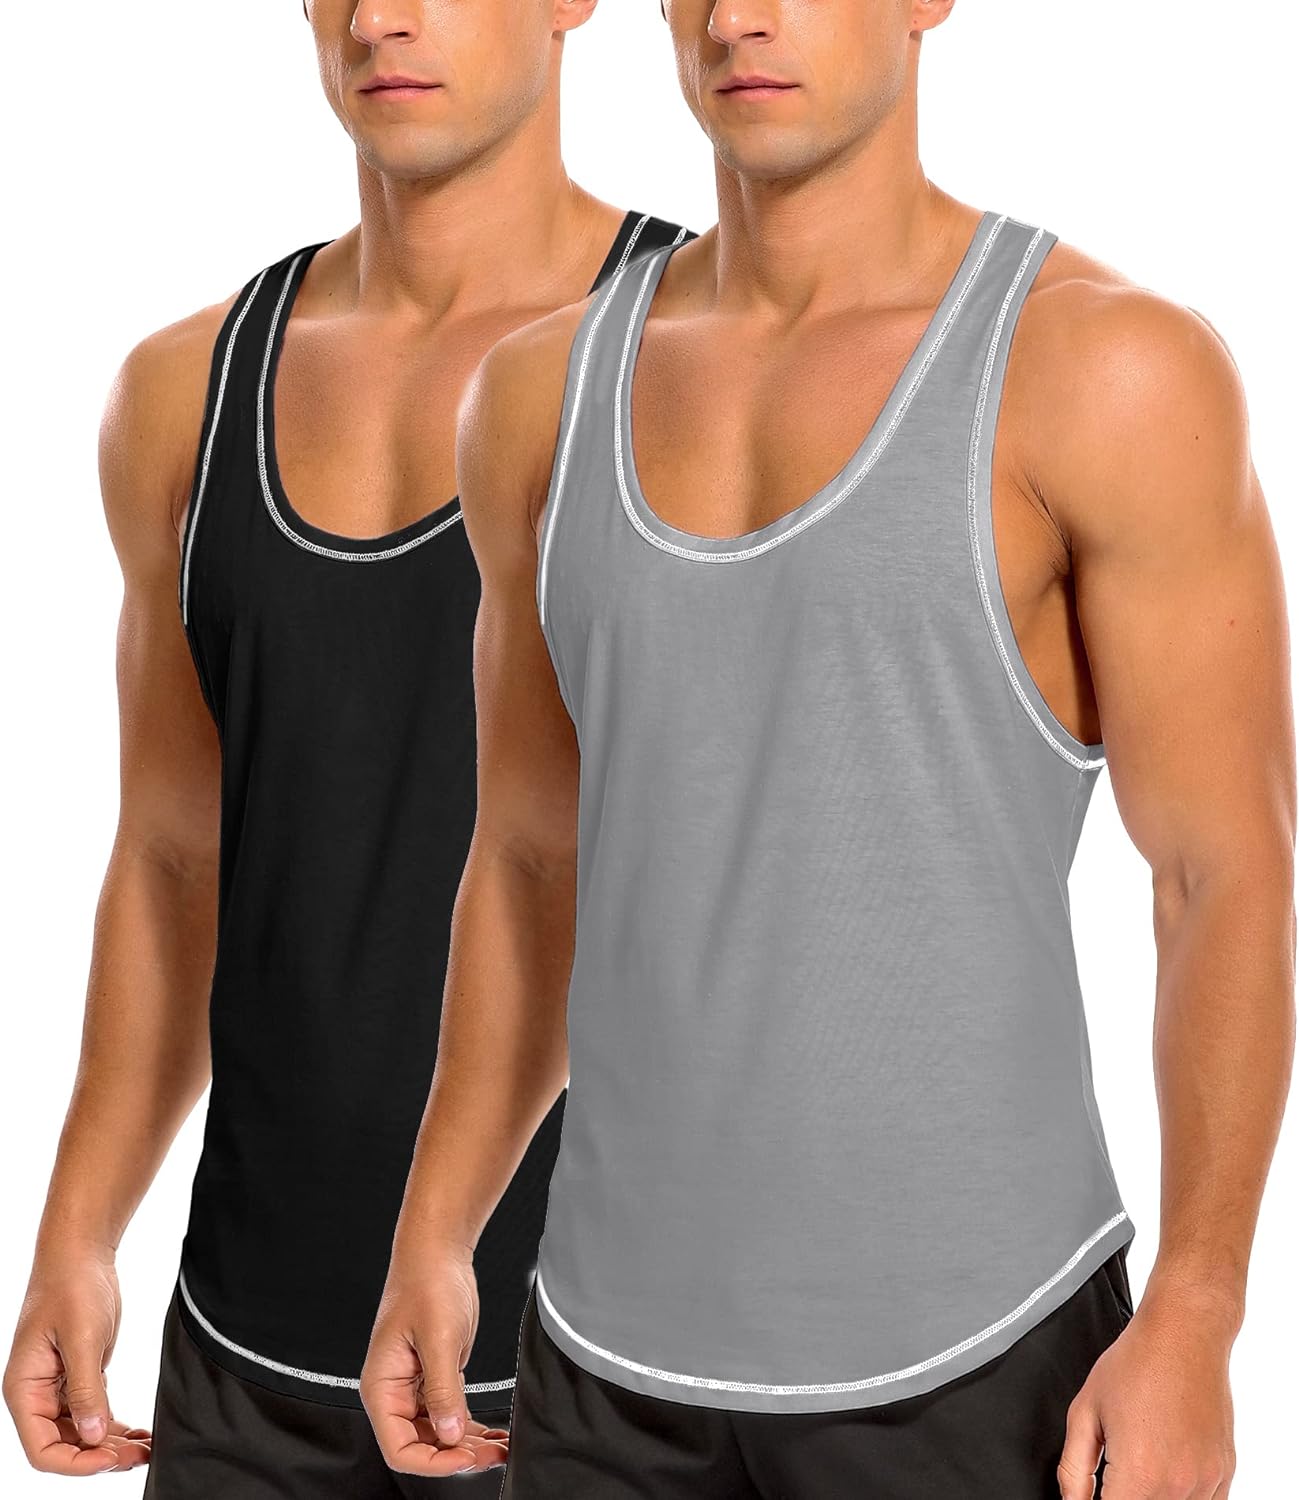 LecGee Mens 2 Pack Gym Workout Tank Top Y-Back Stringer Muscle Tee Fitness Bodybuilding Sleeveless T-Shirt